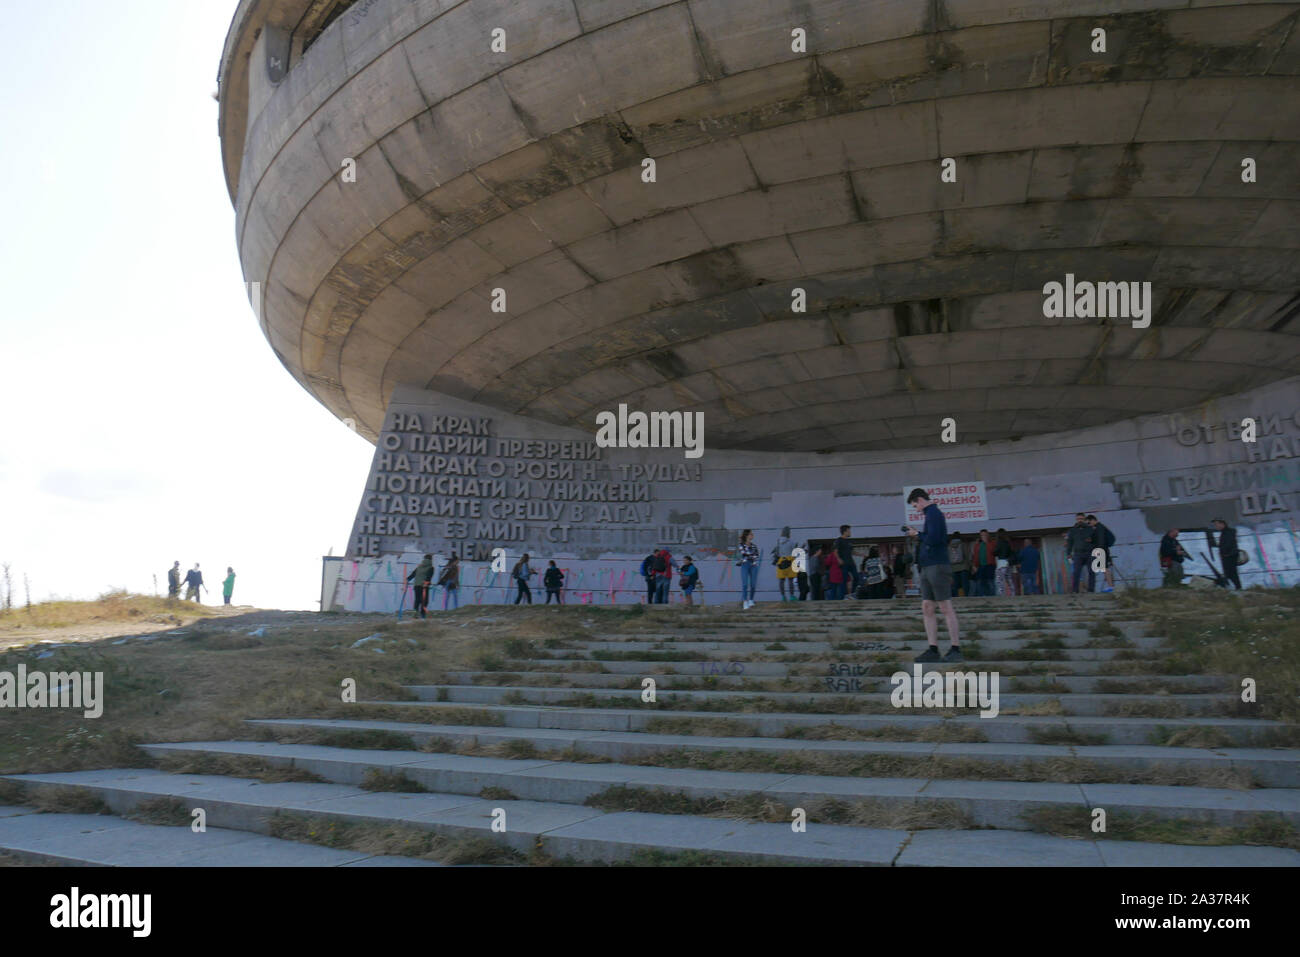 Monument of the Bulgarian Communist Party at Buzludzha Peak, Bulgaria. 09.14. 2019 Sanctuary for the Bulgarian Communists until 1989. It is now among Stock Photo